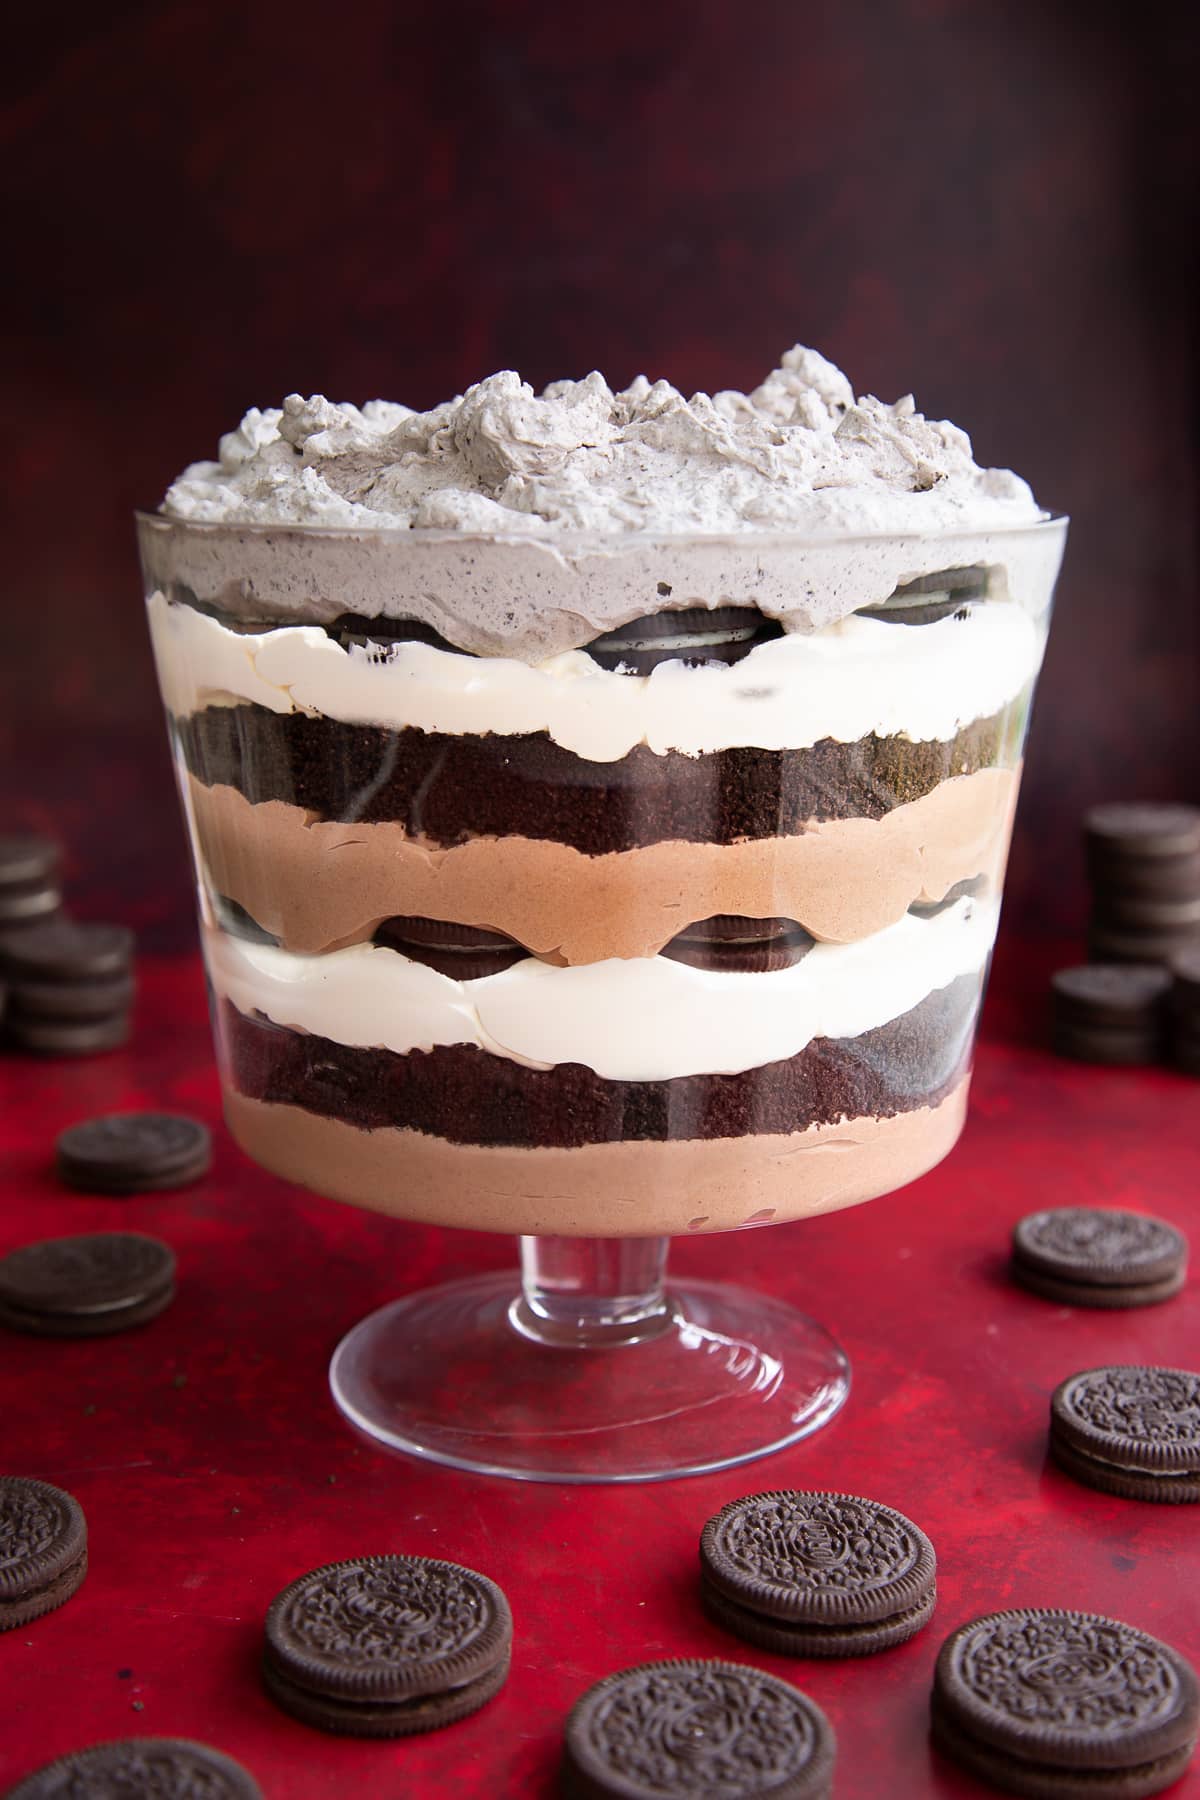 A layer of chocolate pudding, then crushed Oreos, then whipped cream, then Oreos, then chocolate pudding, then crushed Oreos, then cream, then Oreos, then Oreo crumb laced cream in a trifle bowl.